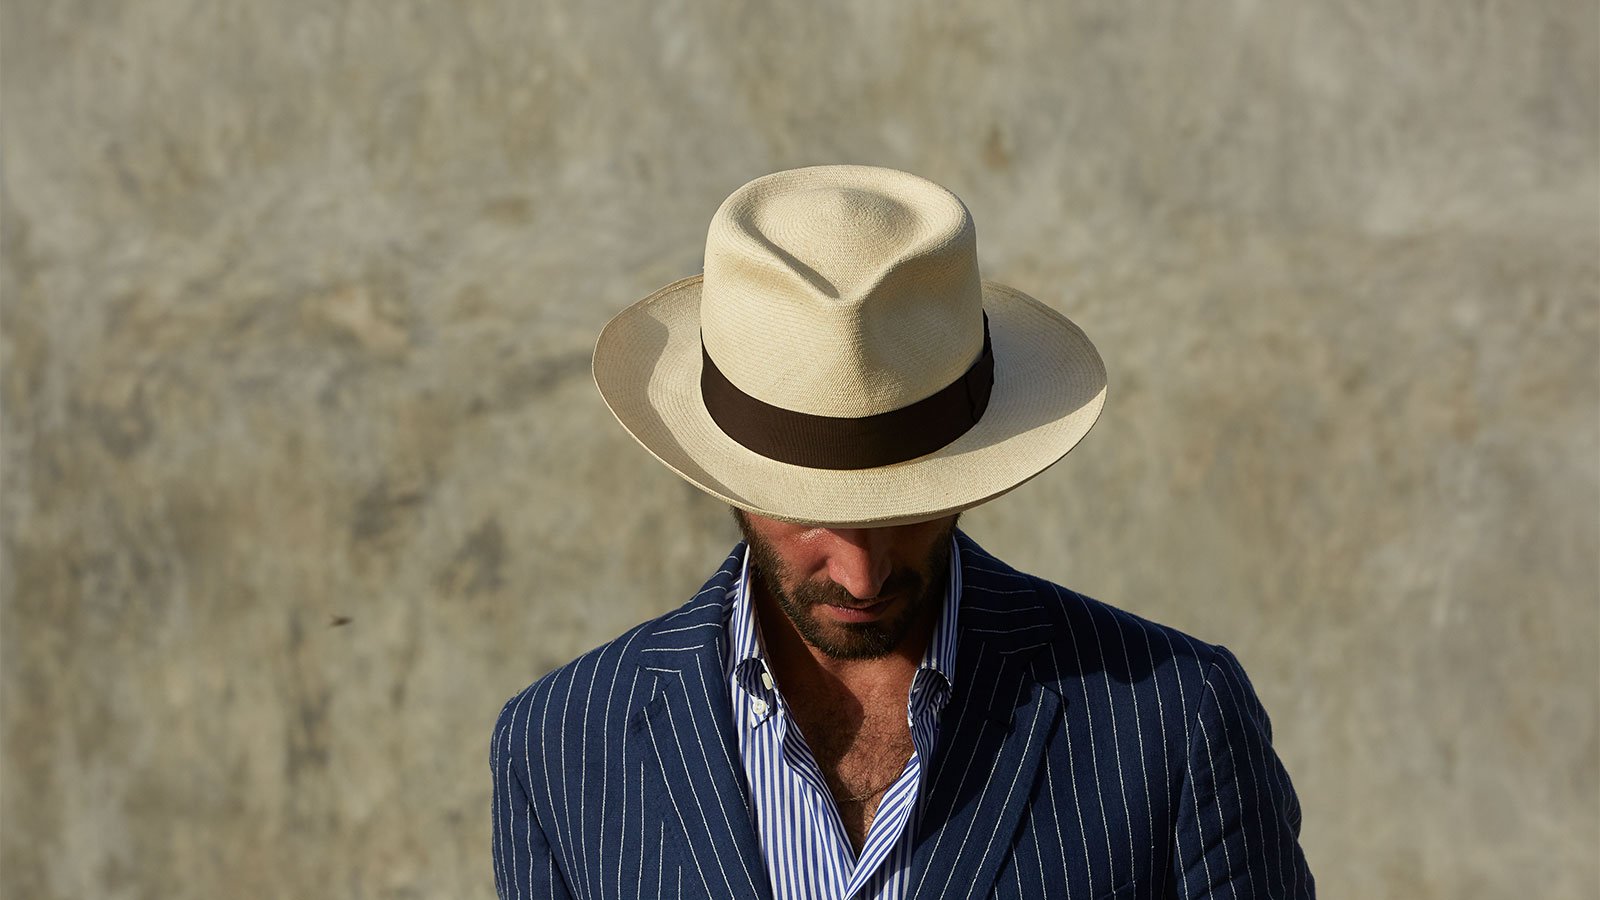 Design
Rarer than a perfect diamond and infinitely more refined, we are proud to carry the most exquisitely crafted Montecristi Panama hats in the world. Depending on the quality of the weave, a Worth & Worth Montecristi Panama Hat can take several months to weave by our master weavers in Ecuador. Available in four different qualities, the result is a hat with a soft texture, translucent appearance, and luminous ivory color.
Material
This Montecristi Panama straw is handwoven in Ecuador available in 4 different qualities: Artisan, Master, Museum, and Superfino and handcrafted in our NY atelier. 
Specifications
Our Montecristi Barbados Sand combines a 4 teardrop crown and  3” brim with 100% weathered organic sand cotton Hatband juxtapositioned with a Kick.  Handwoven by our master weavers in Ecuador.Handcrafted in New York. Truly a work of art.